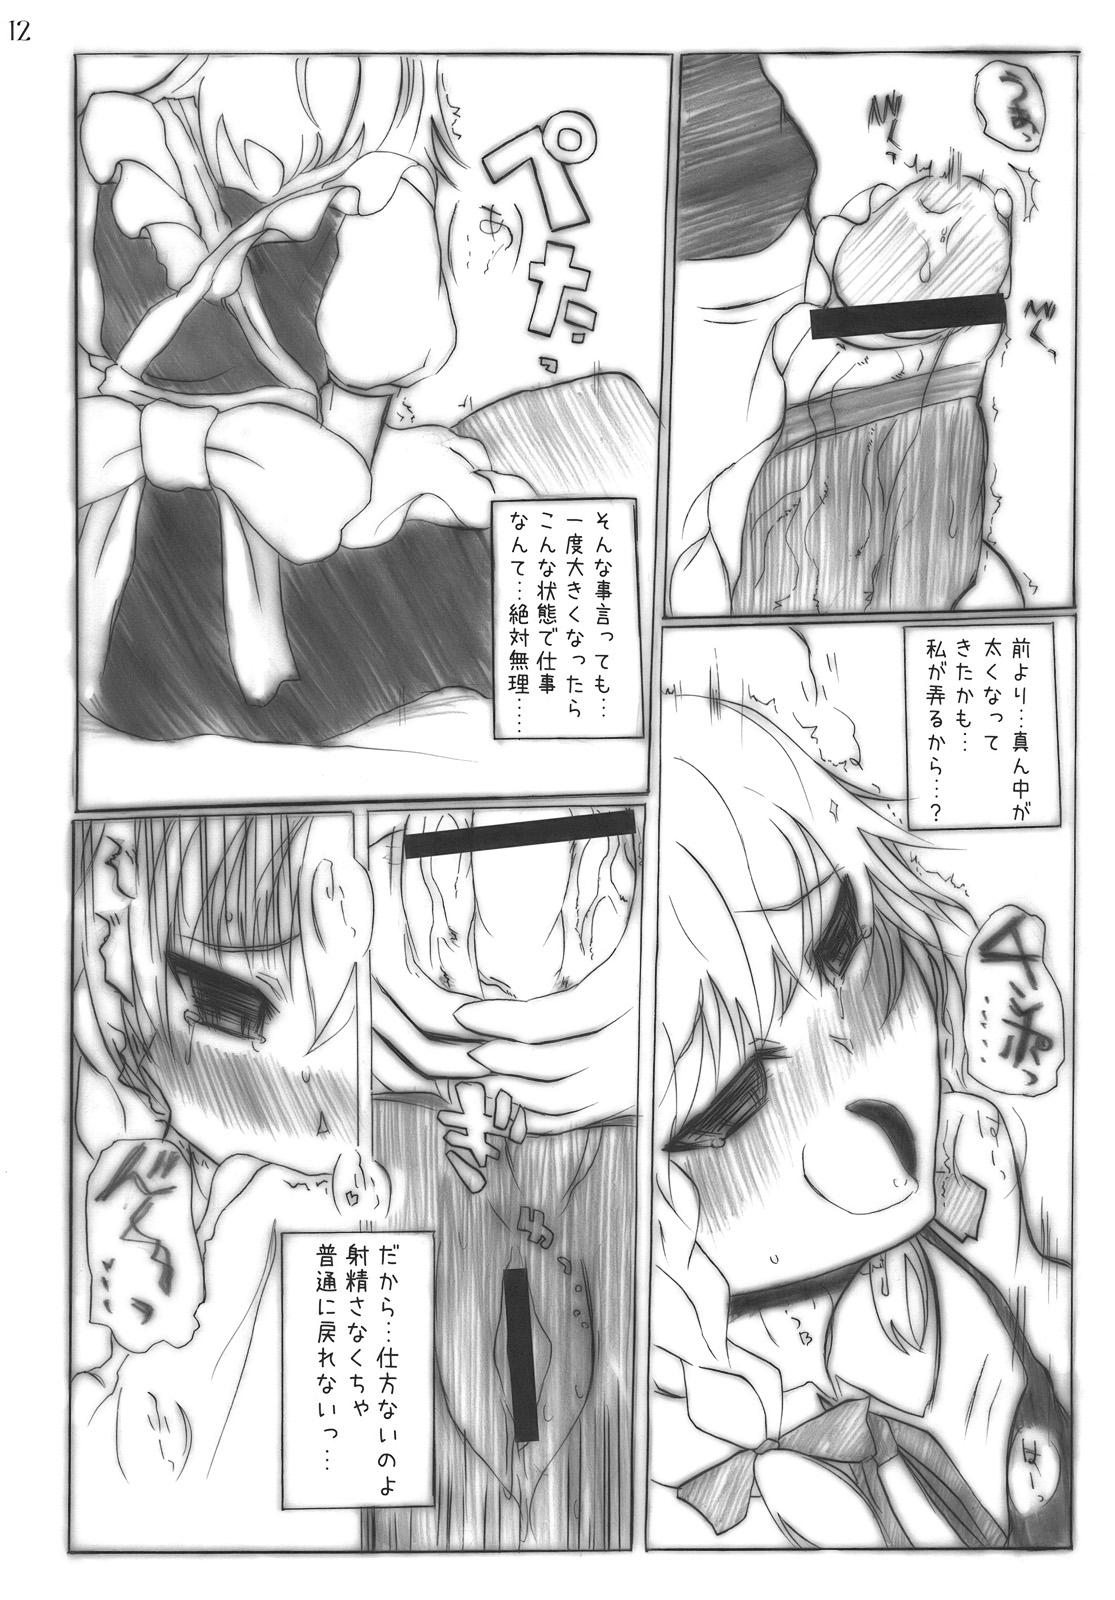 Throatfuck overdose - Touhou project Shemales - Page 12